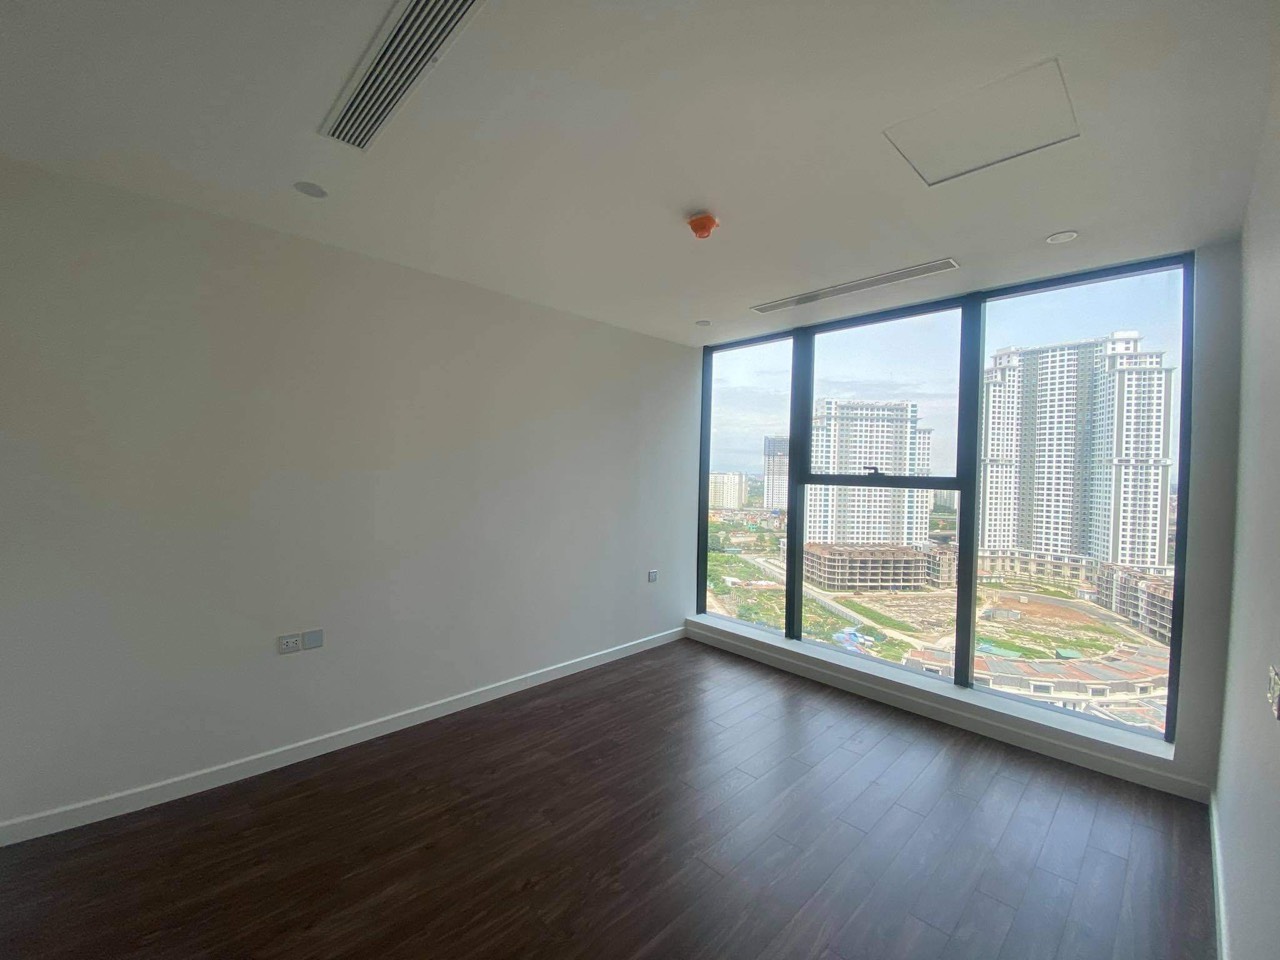 A 3-bedroom apartment for sale in Sunshine City - Building S5 - Internal: 98sqm